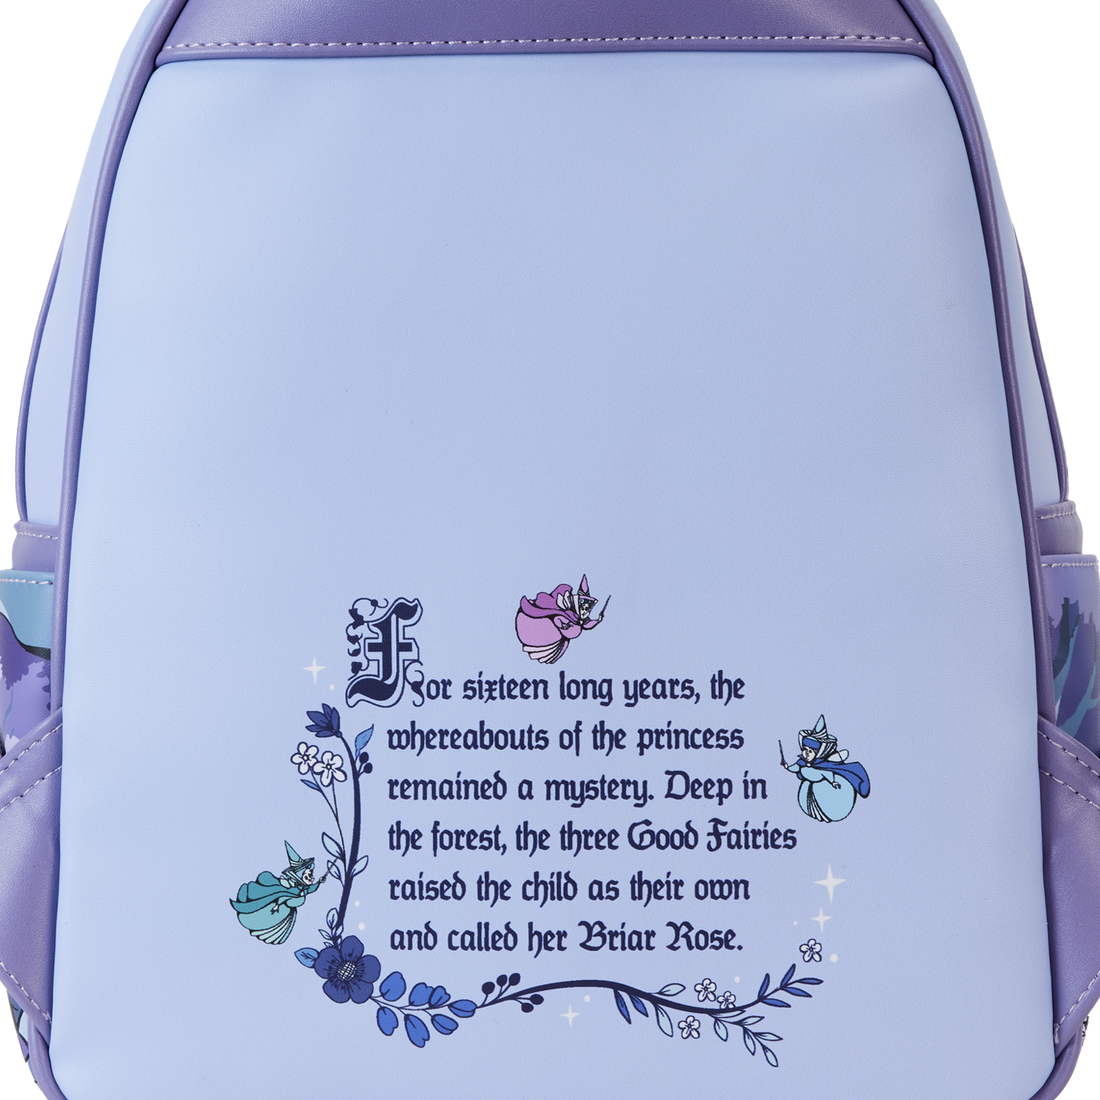 Loungefly 2024 Pre Order only sleeping beauty 65th anniversary backpack